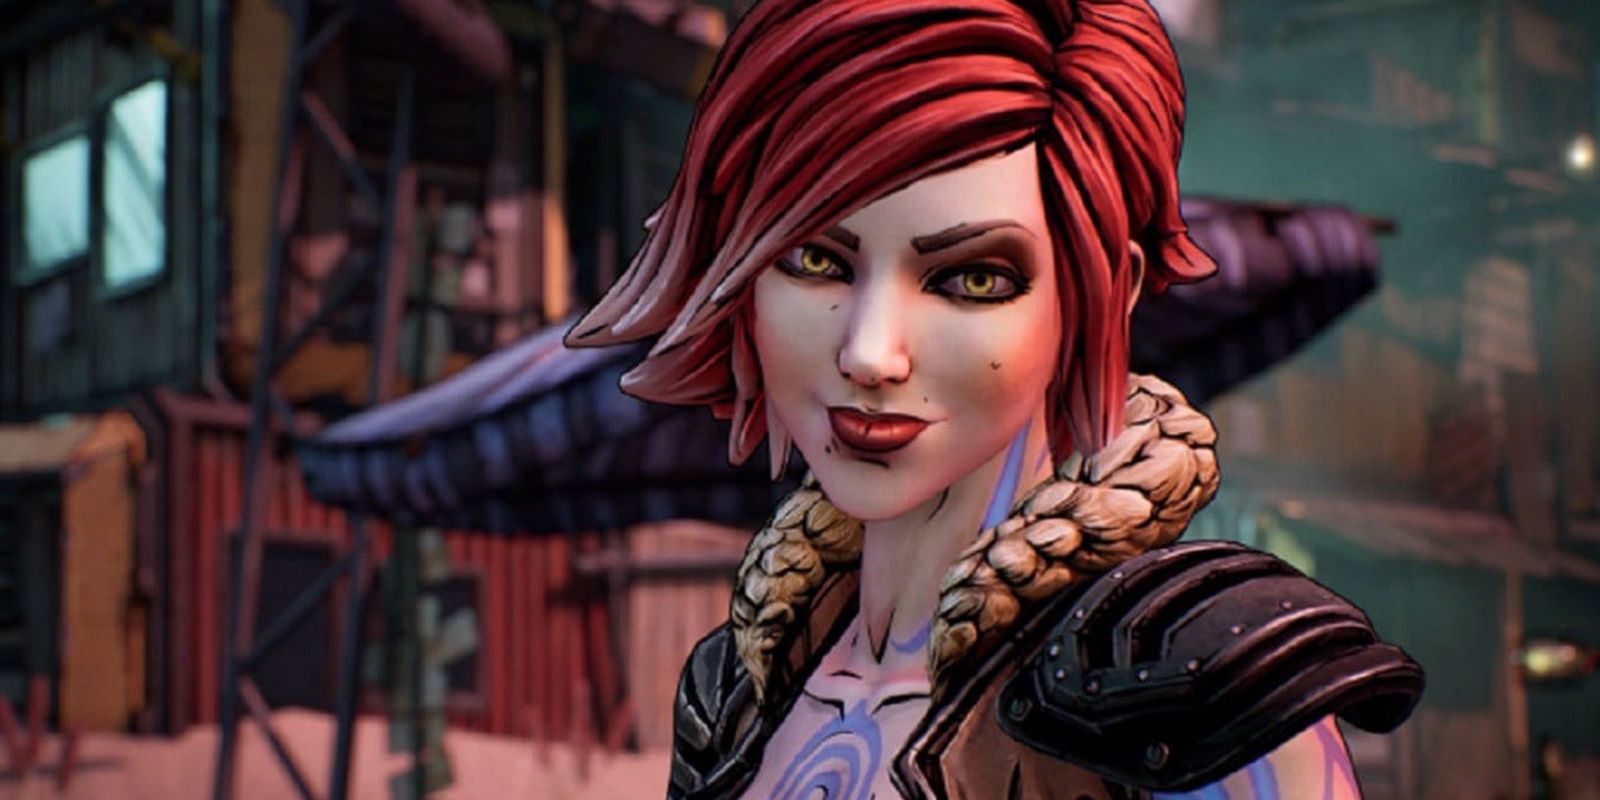 Image of Lilith from Borderlands 3